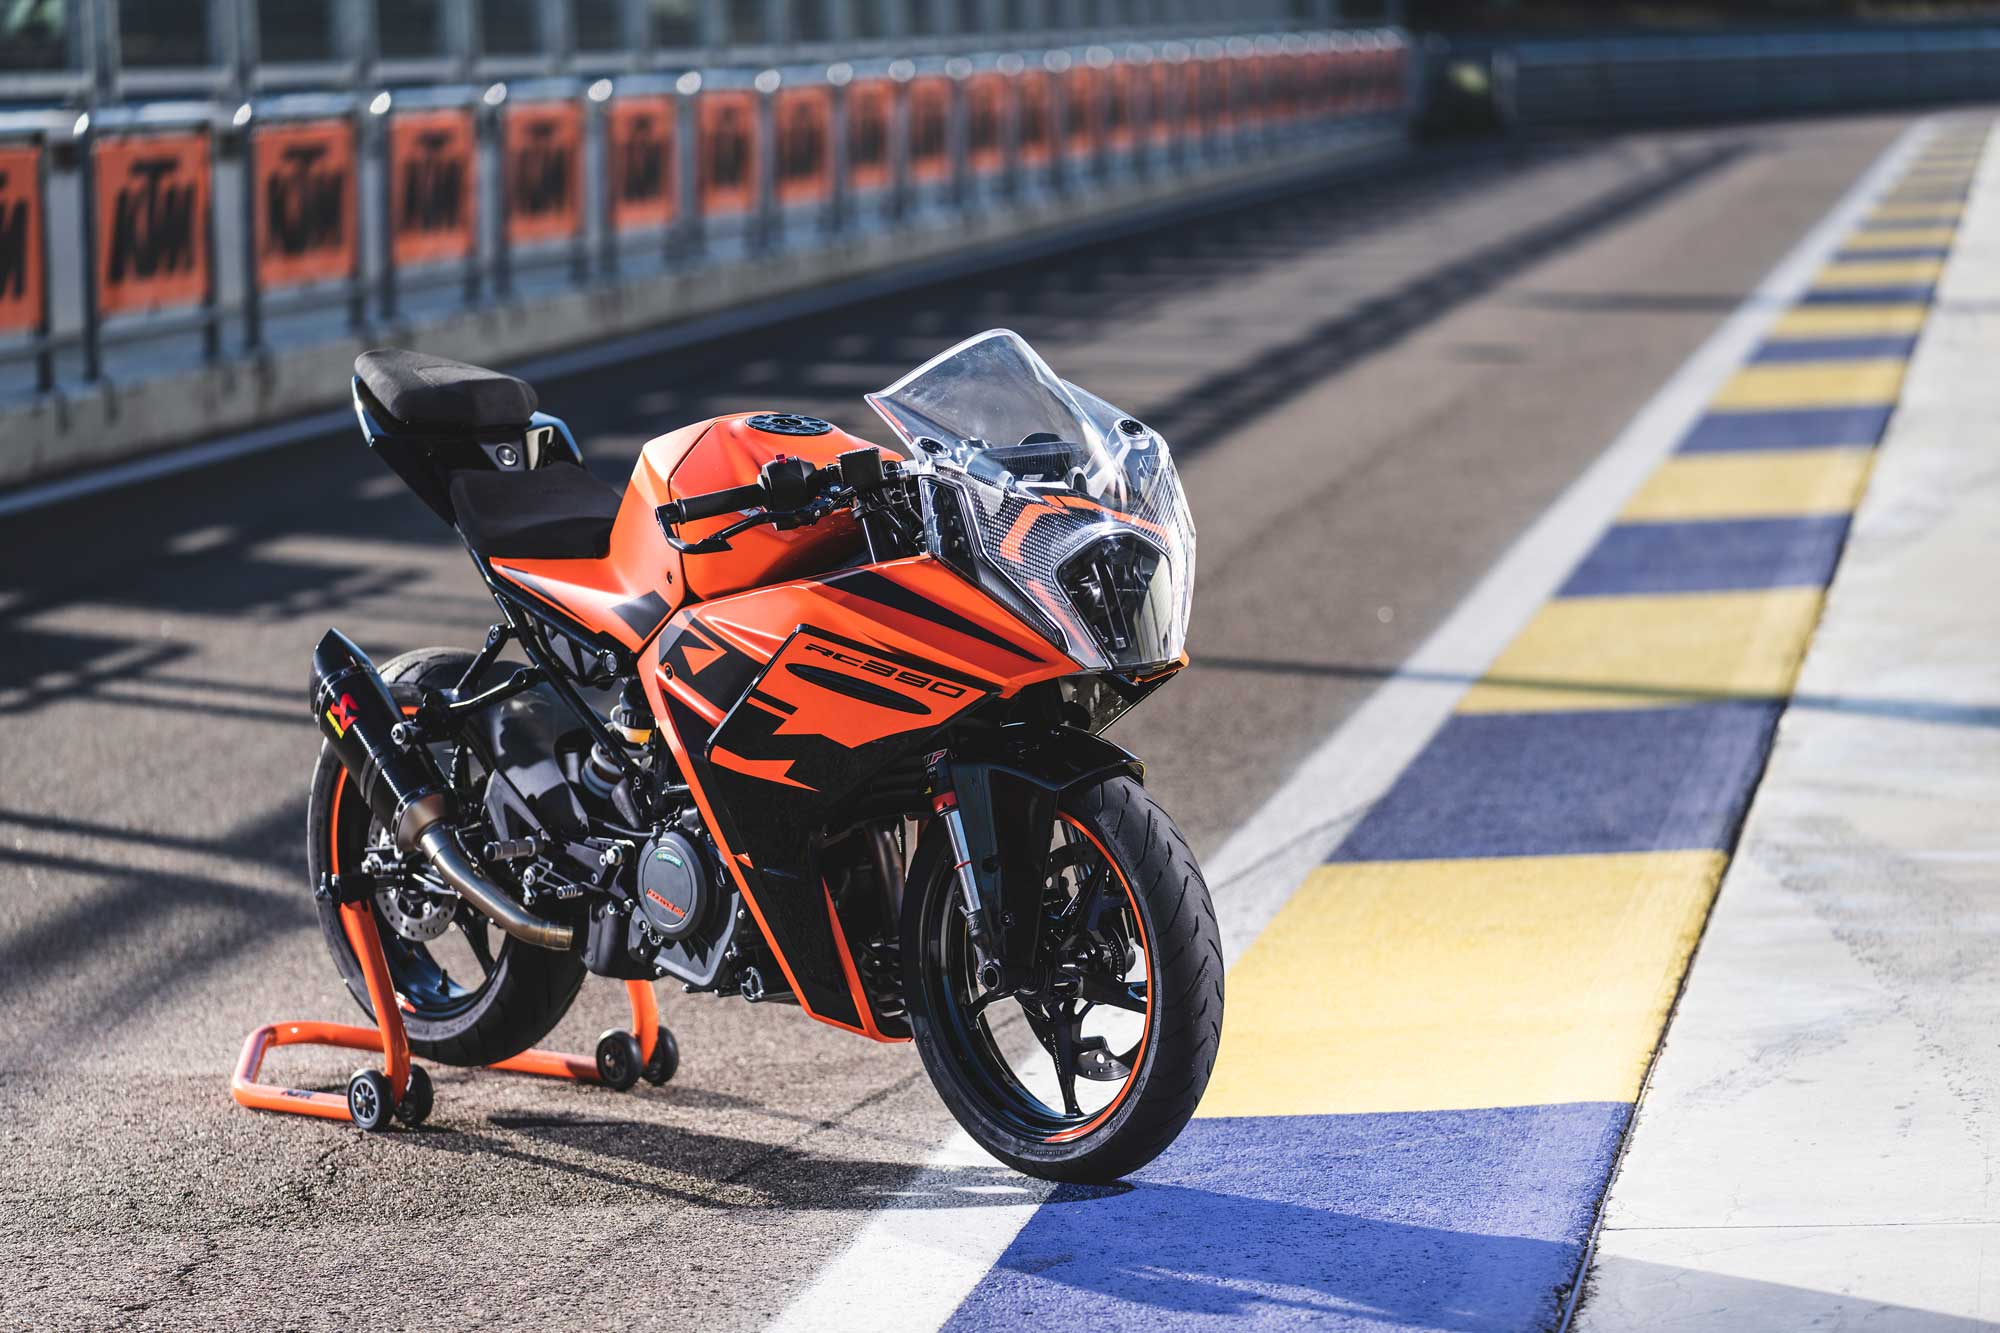 2022 Ktm Rc 390 First Ride Review | Cycle World